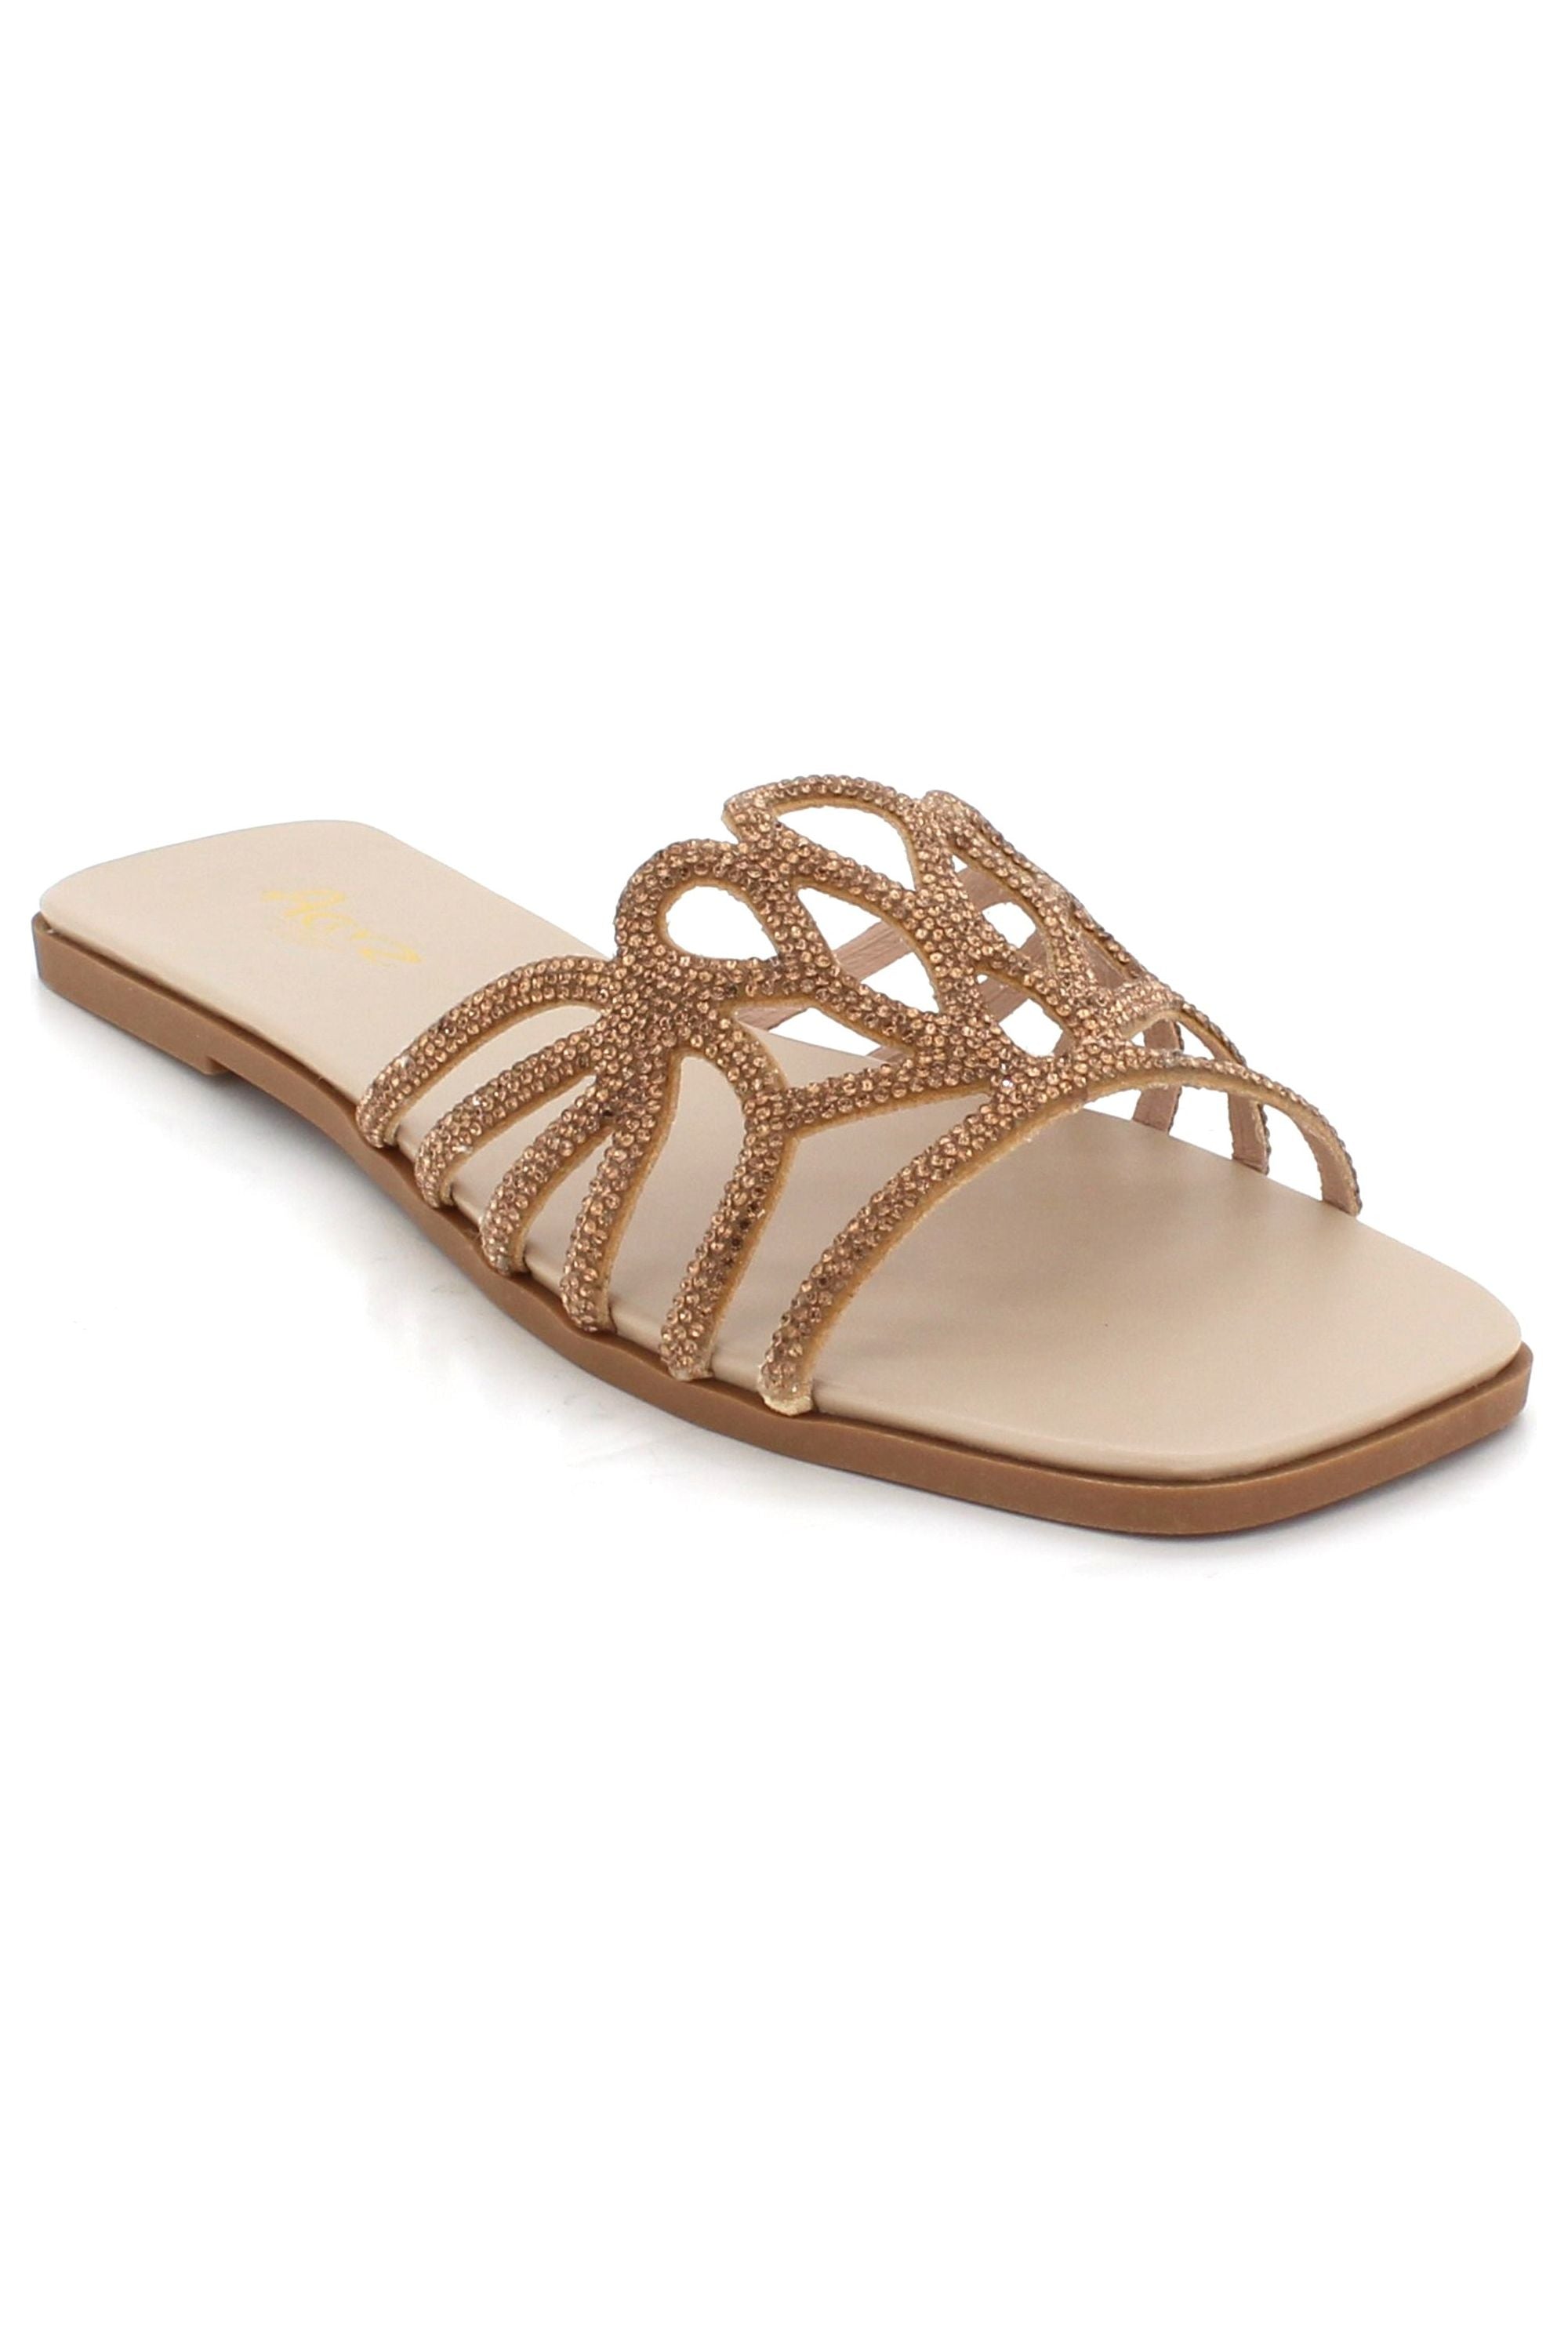 Elegantly Embellished Crystal Encrusted Design Open Toe Party Holiday Summer Beach Casual Comfort Flat Sandals L7580